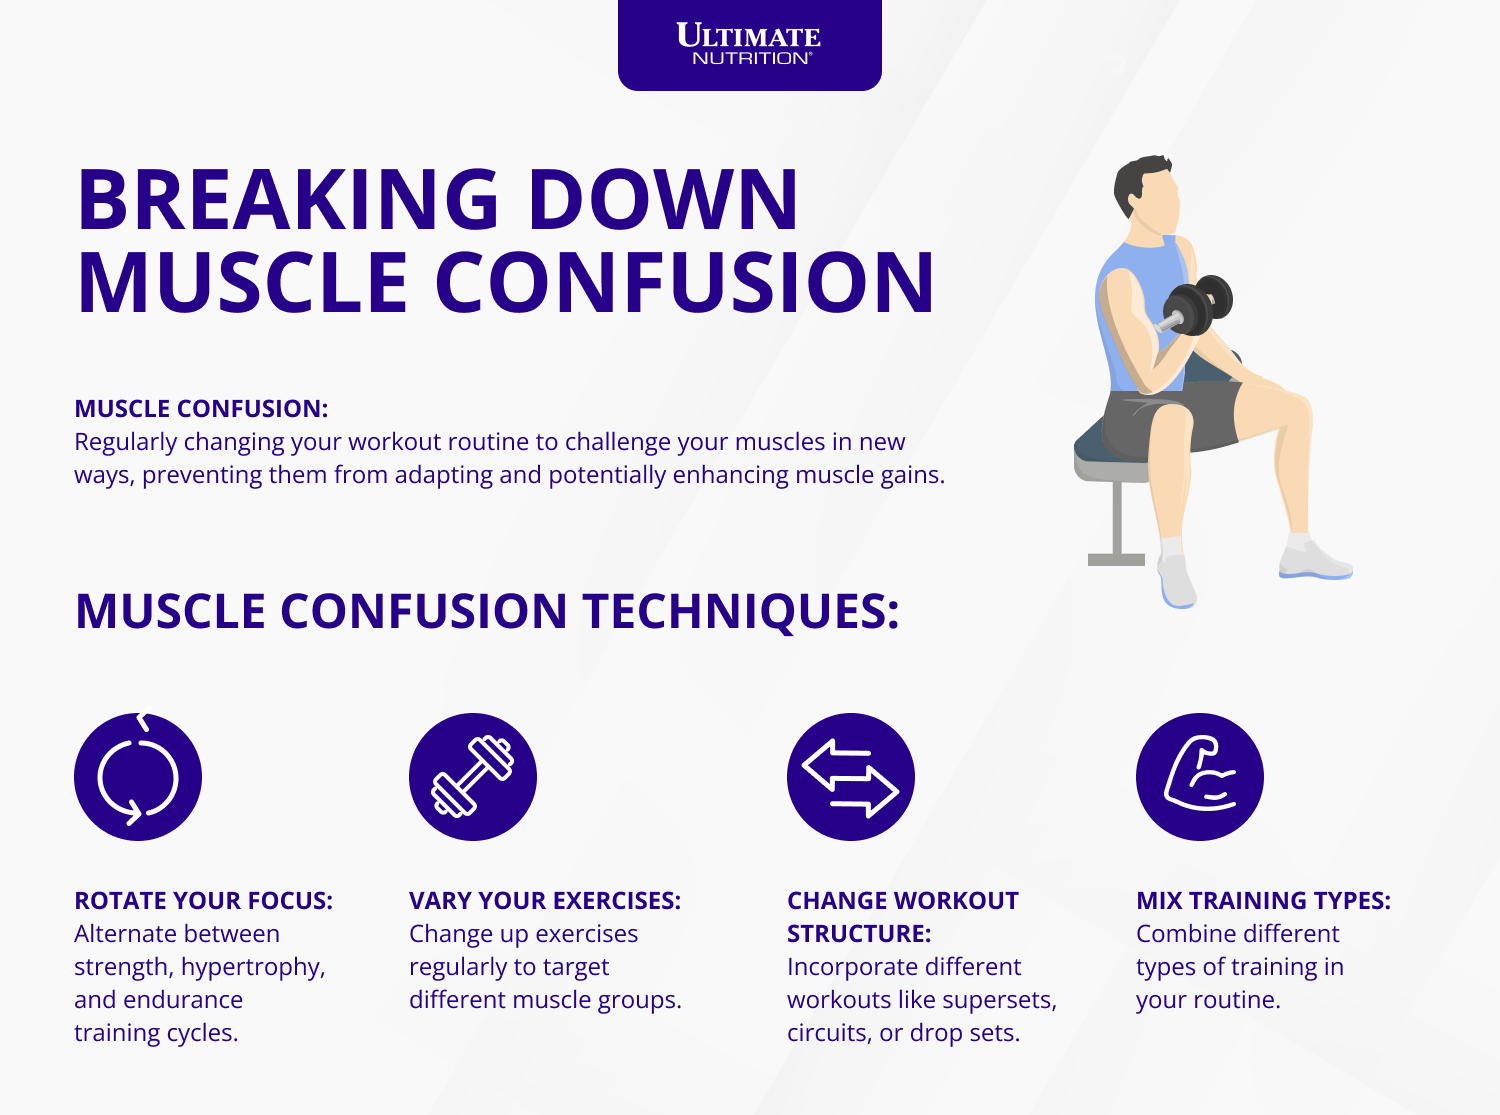 Breaking Down Muscle Confusion Infographic | Ultimate Nutrition